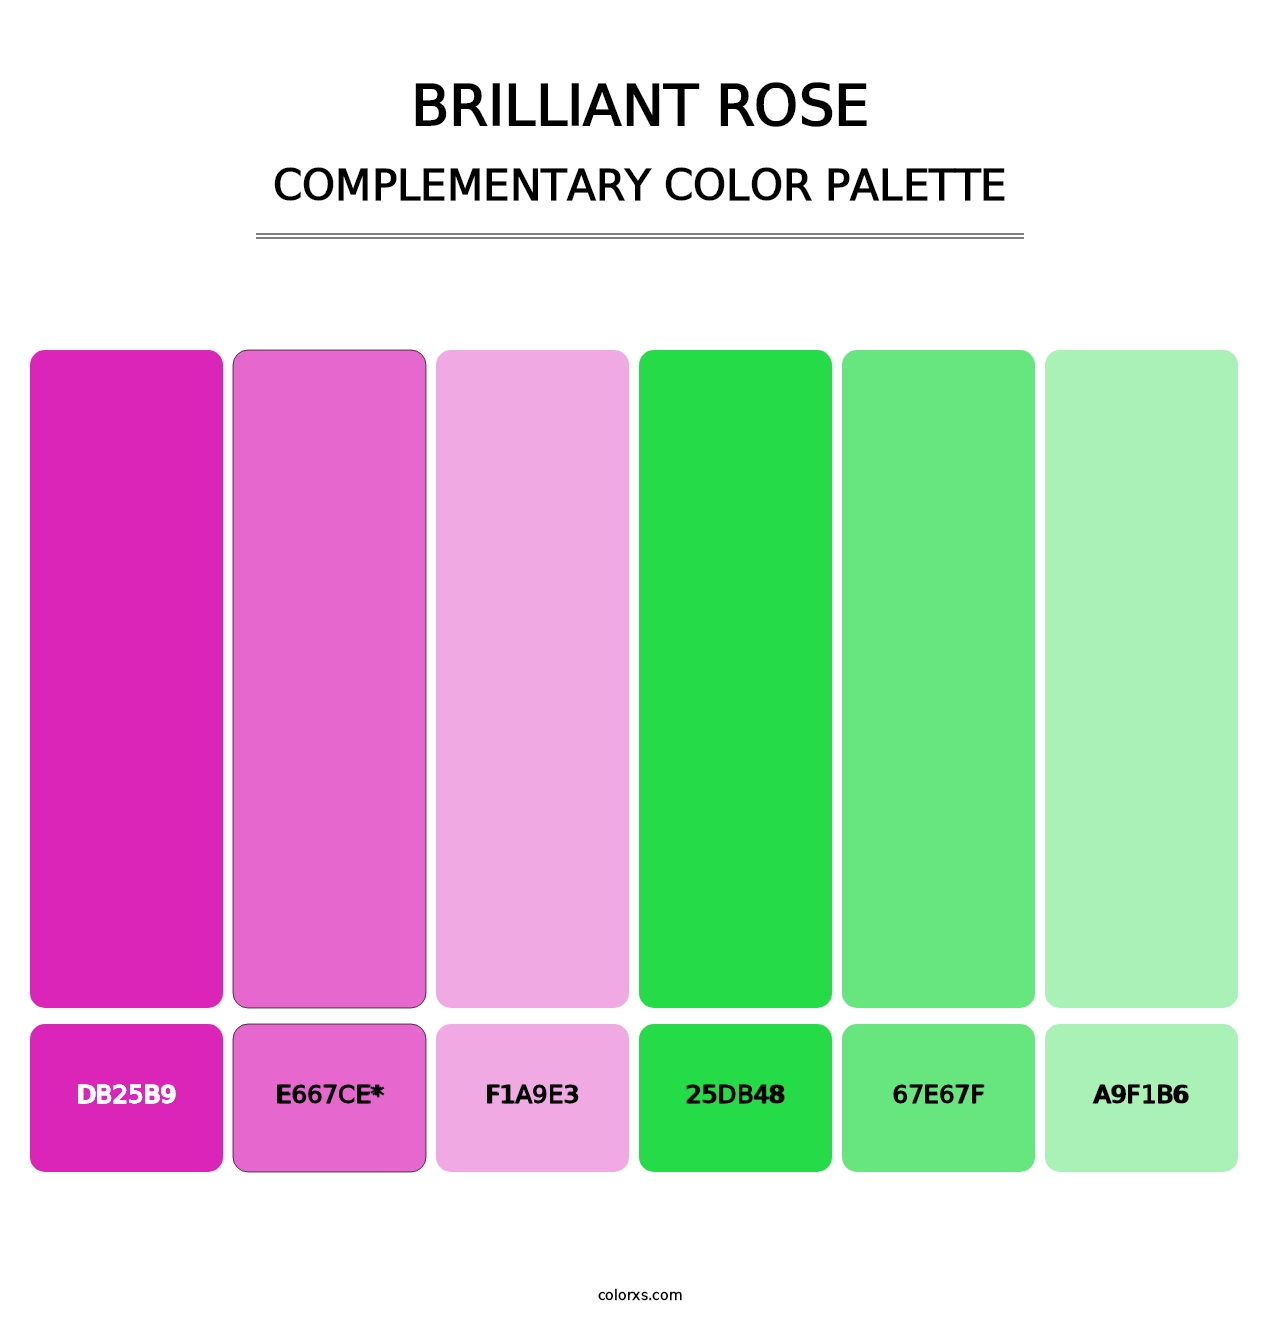 Brilliant Rose - Complementary Color Palette